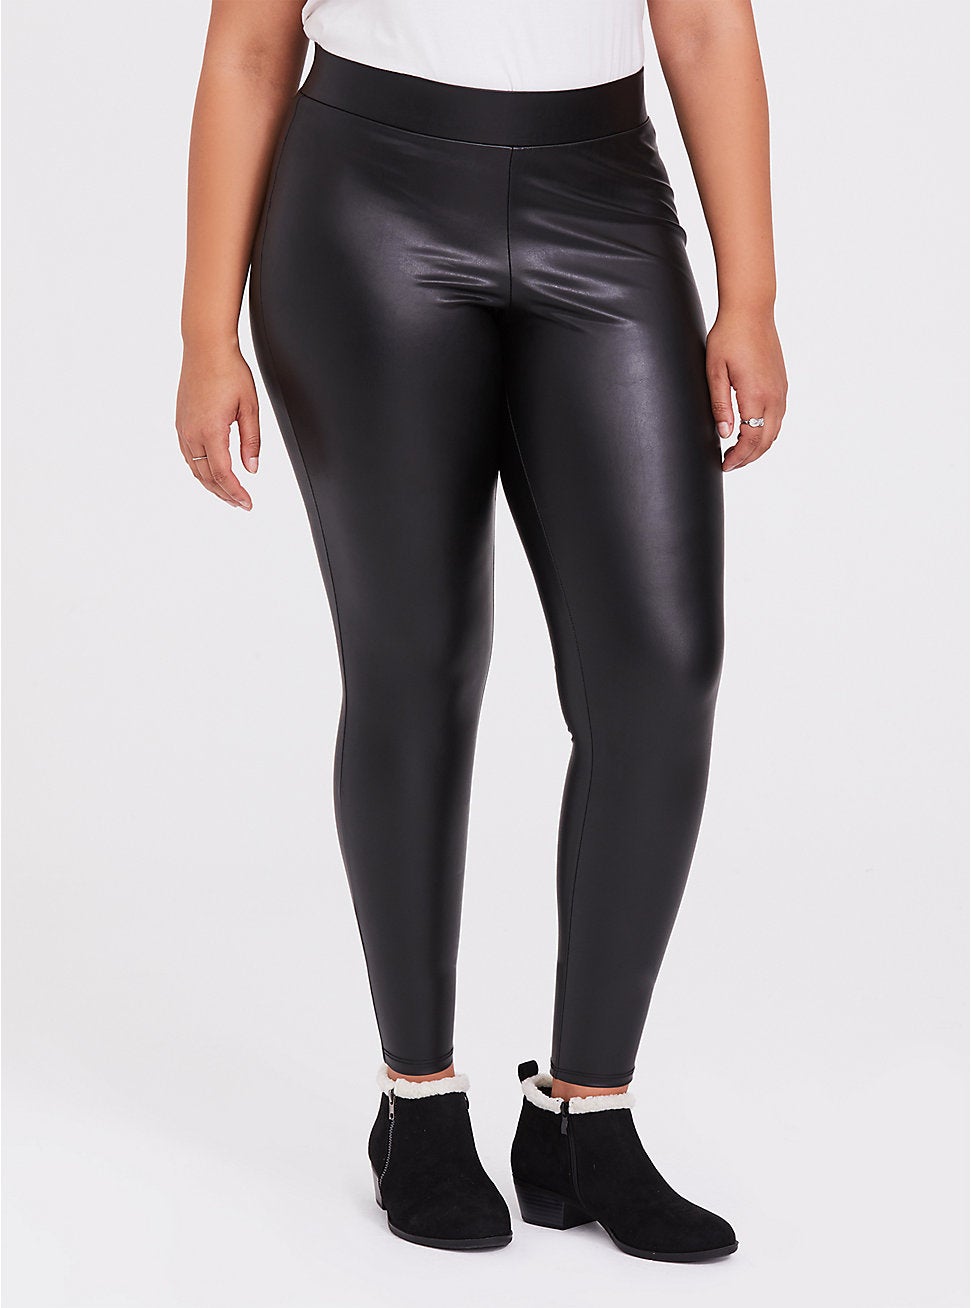 SEASUM Leather Pants for Women Faux Leather Leggings Sexy Black